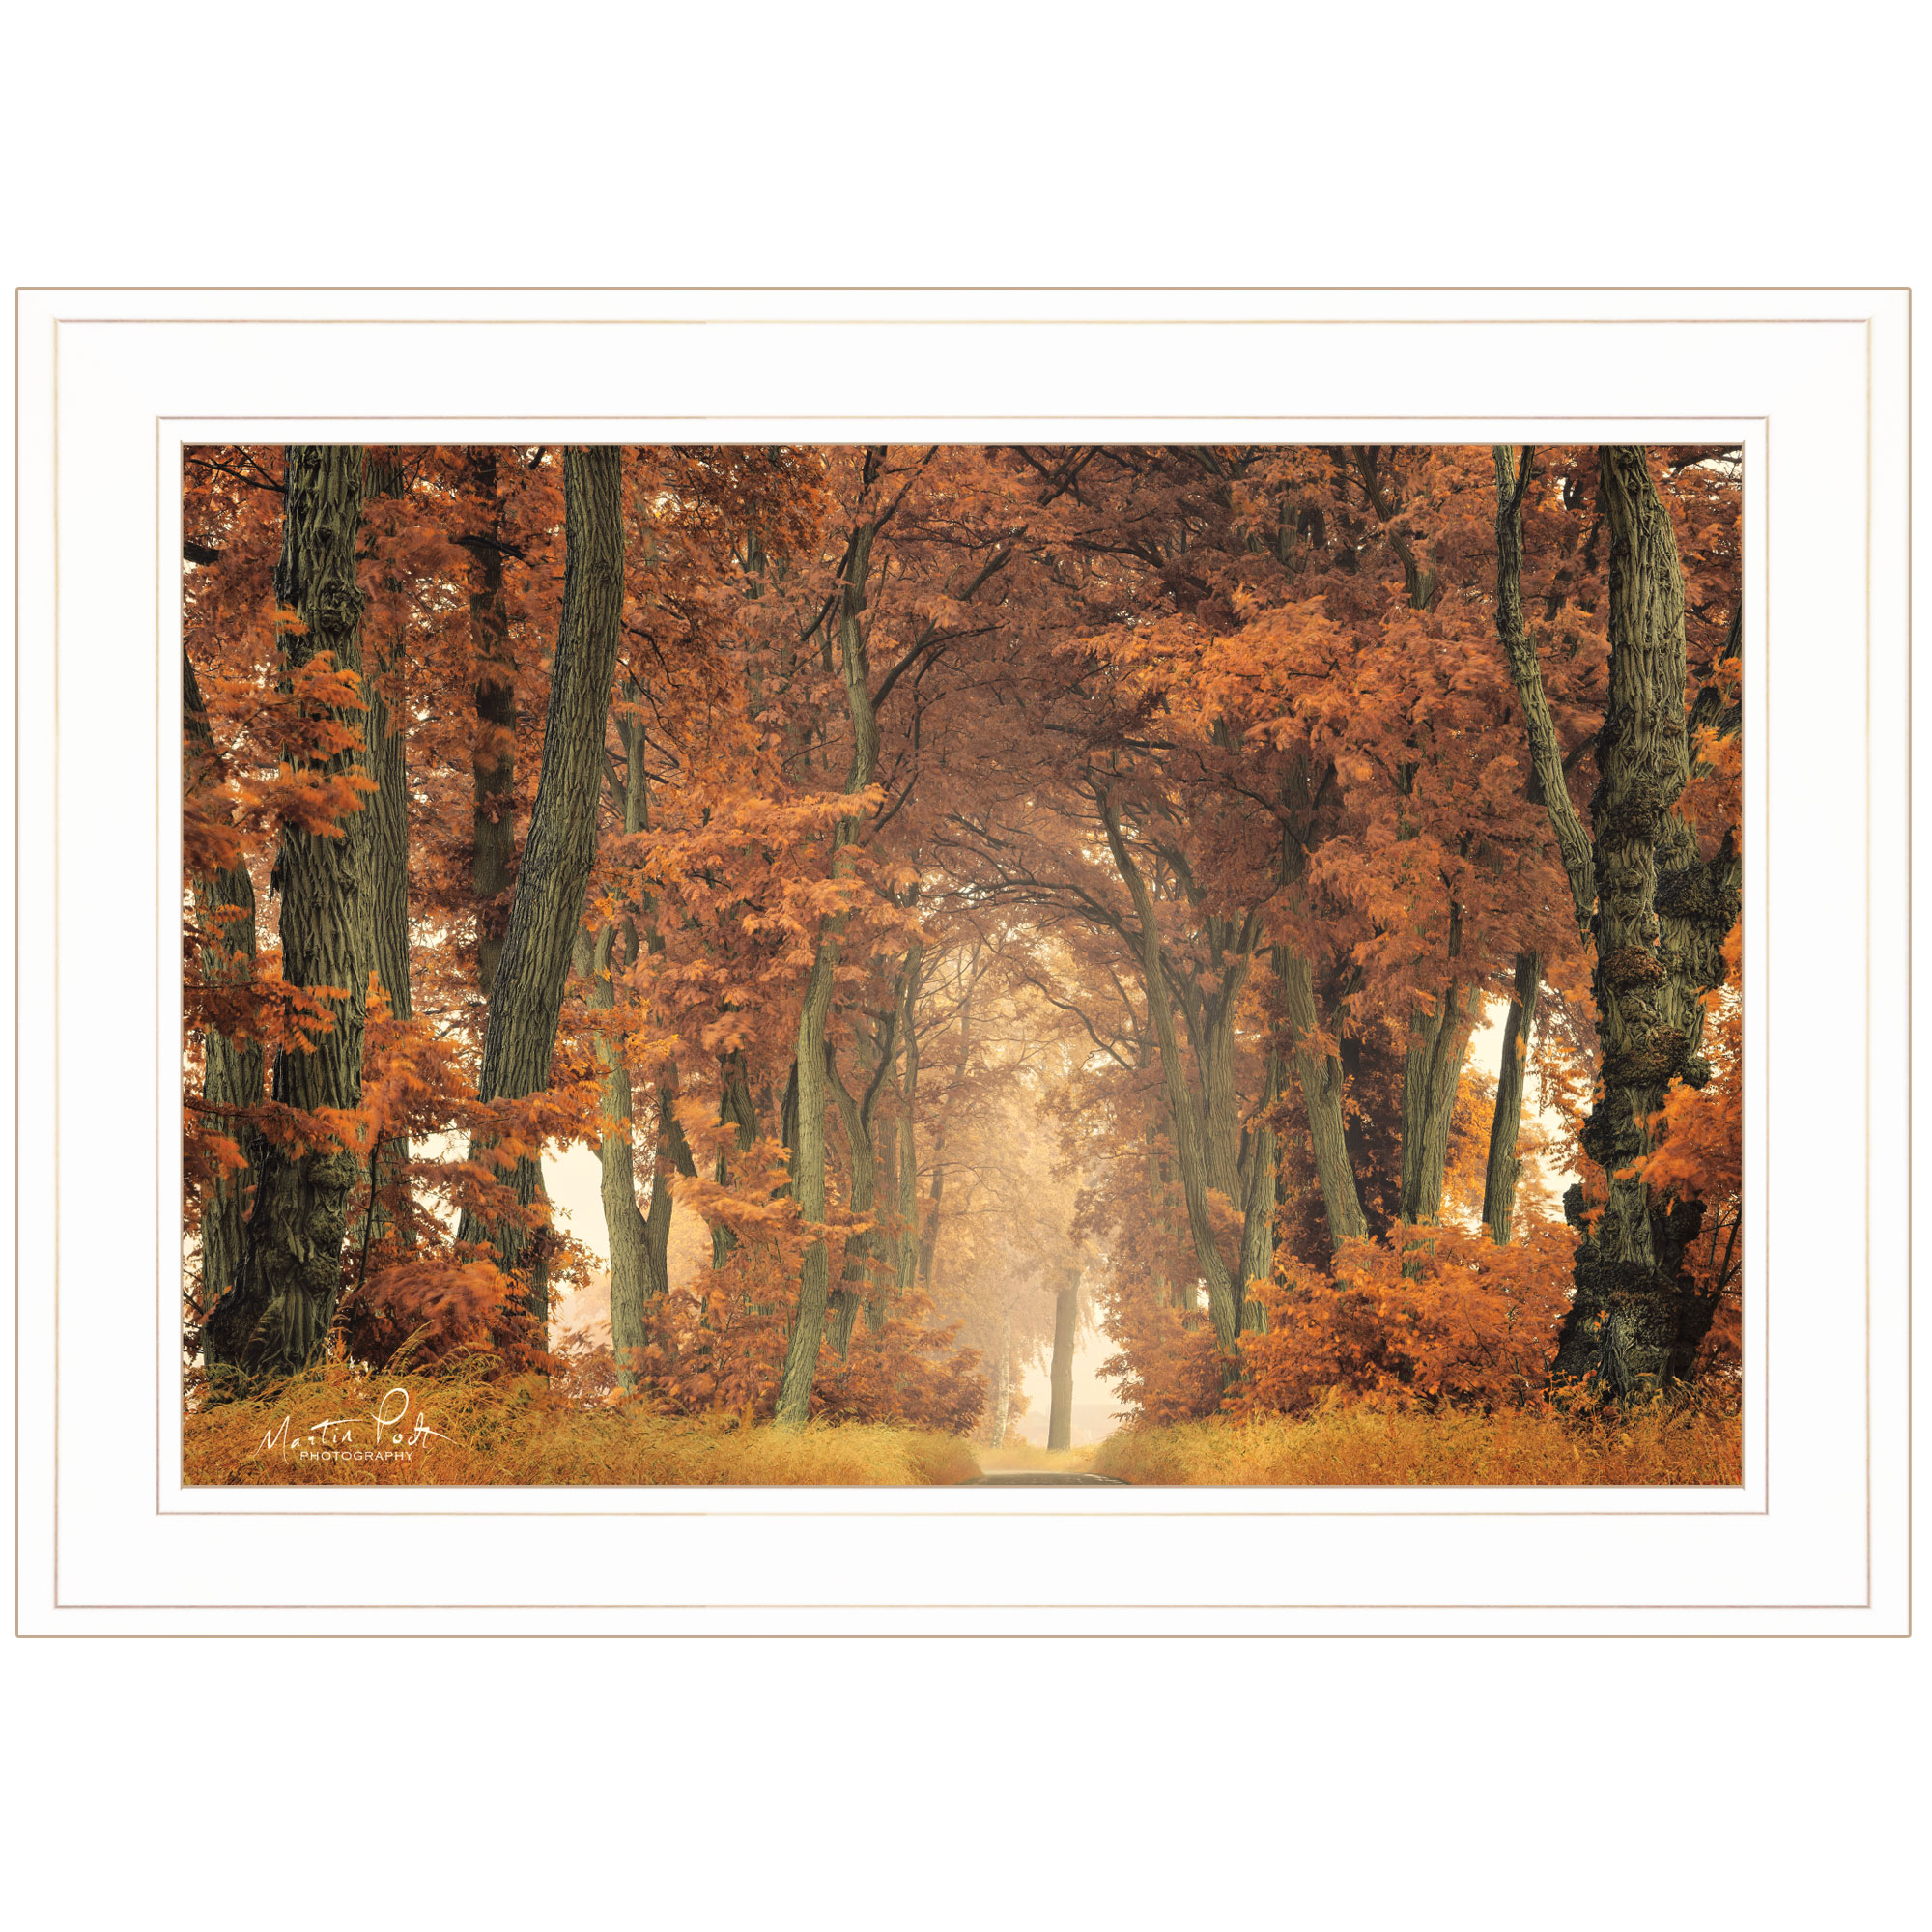 "Follow Your Own Way" by Martin Podt, Ready to Hang Framed Print, White Frame